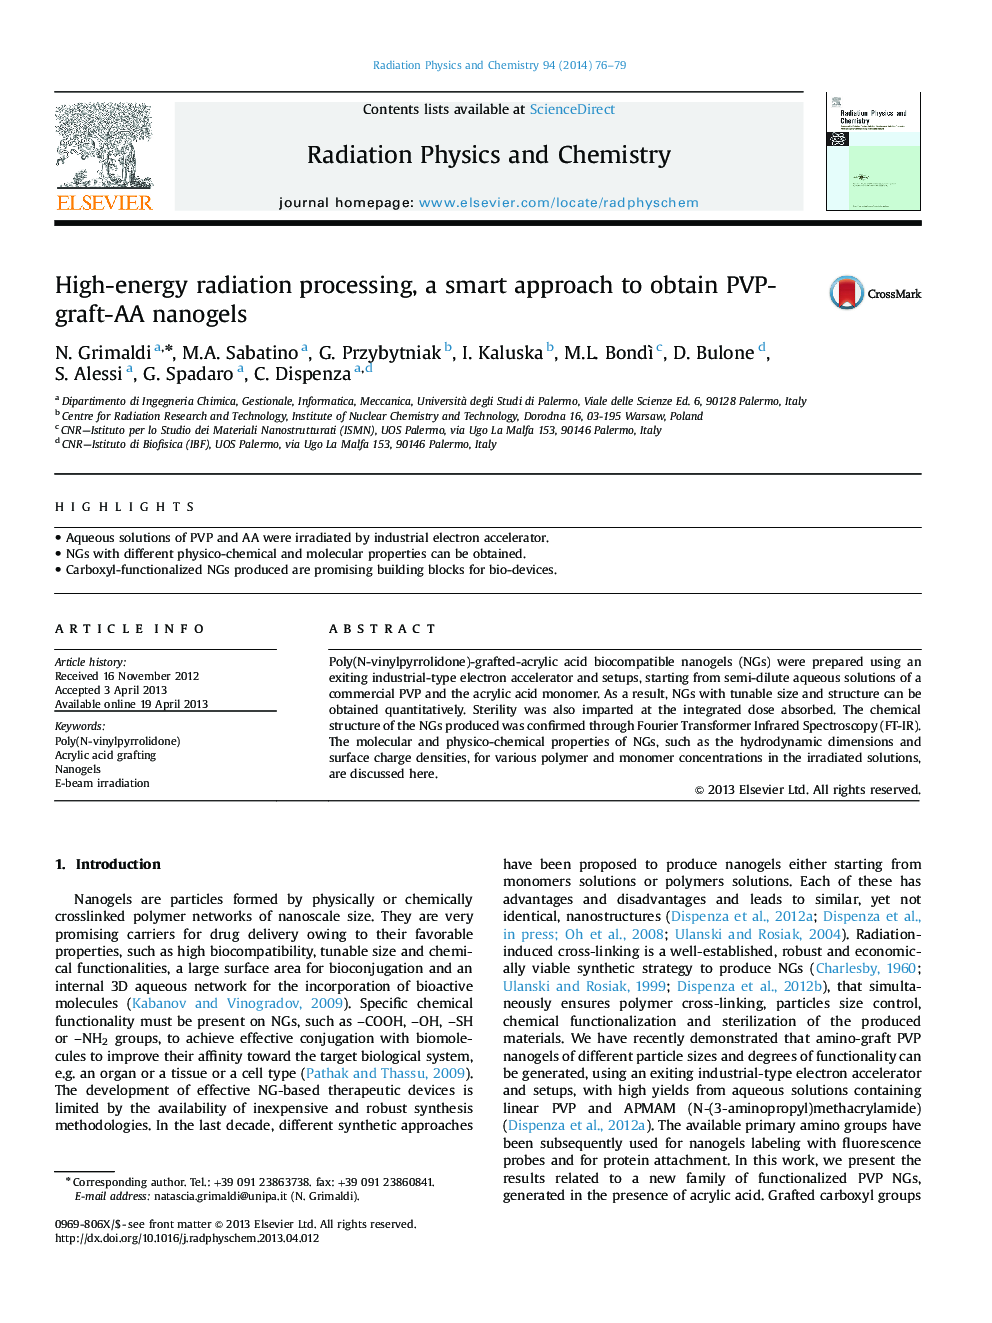 High-energy radiation processing, a smart approach to obtain PVP-graft-AA nanogels